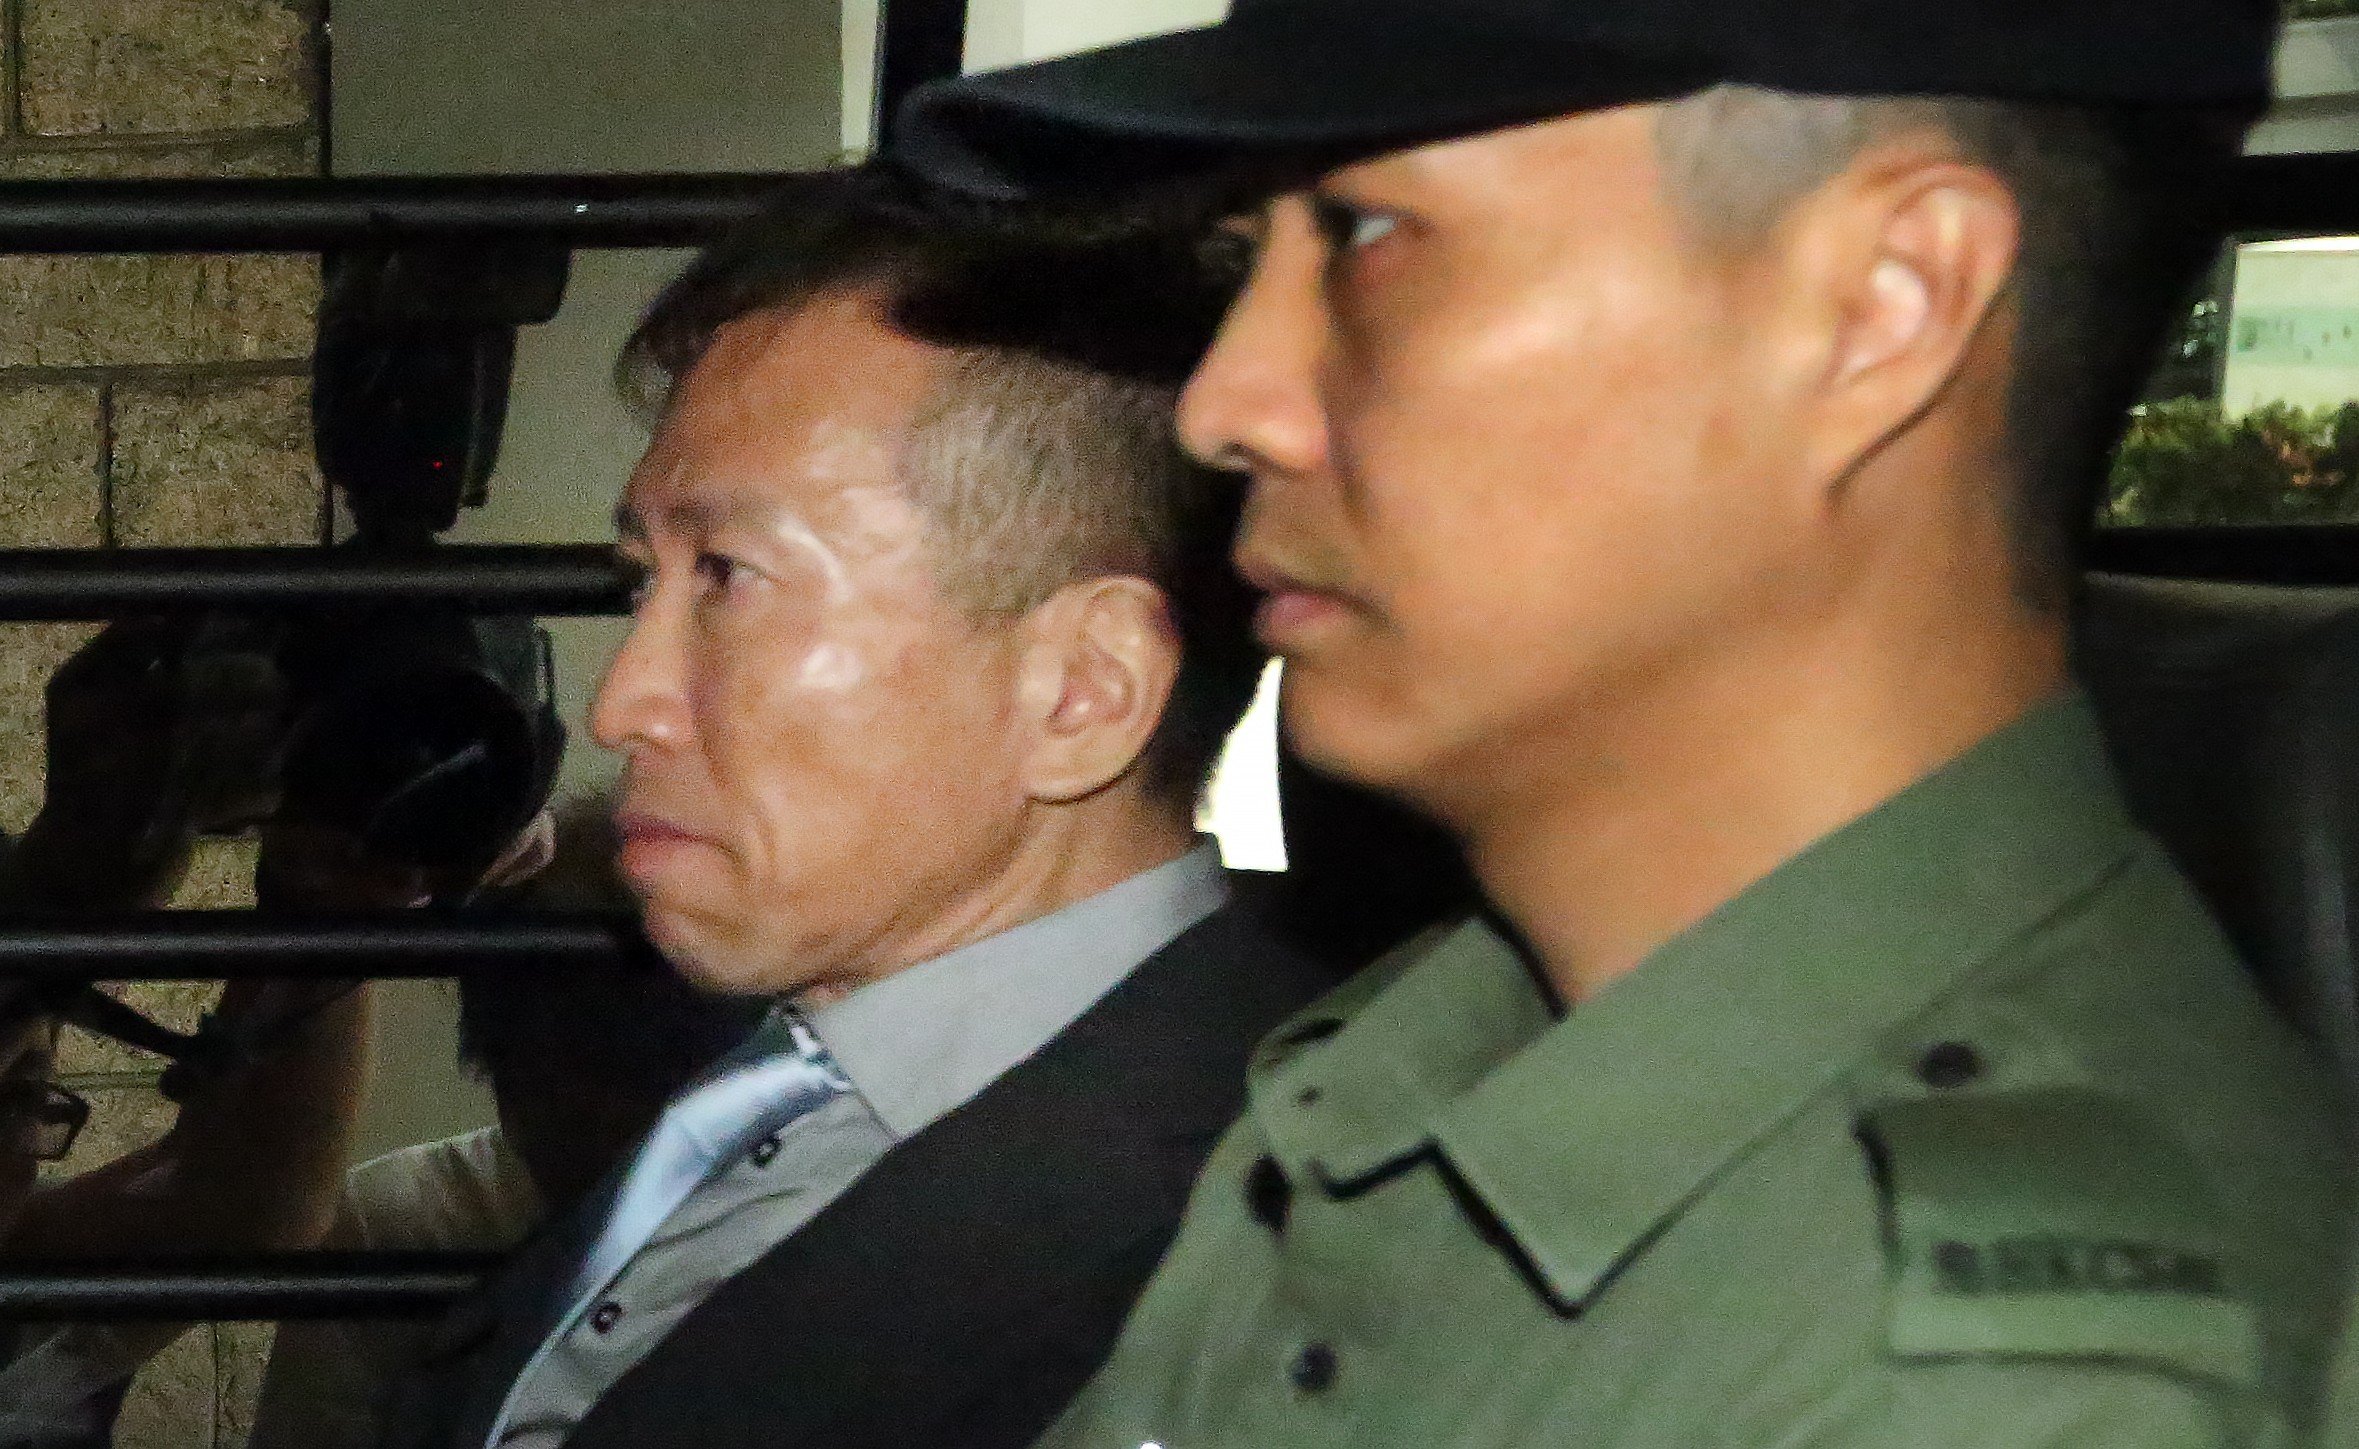 Peter Chan was jailed for 12 years for forging and using a will he claimed was made by Chinachem billionaire Nina Wang in 2006. Photo: Handout